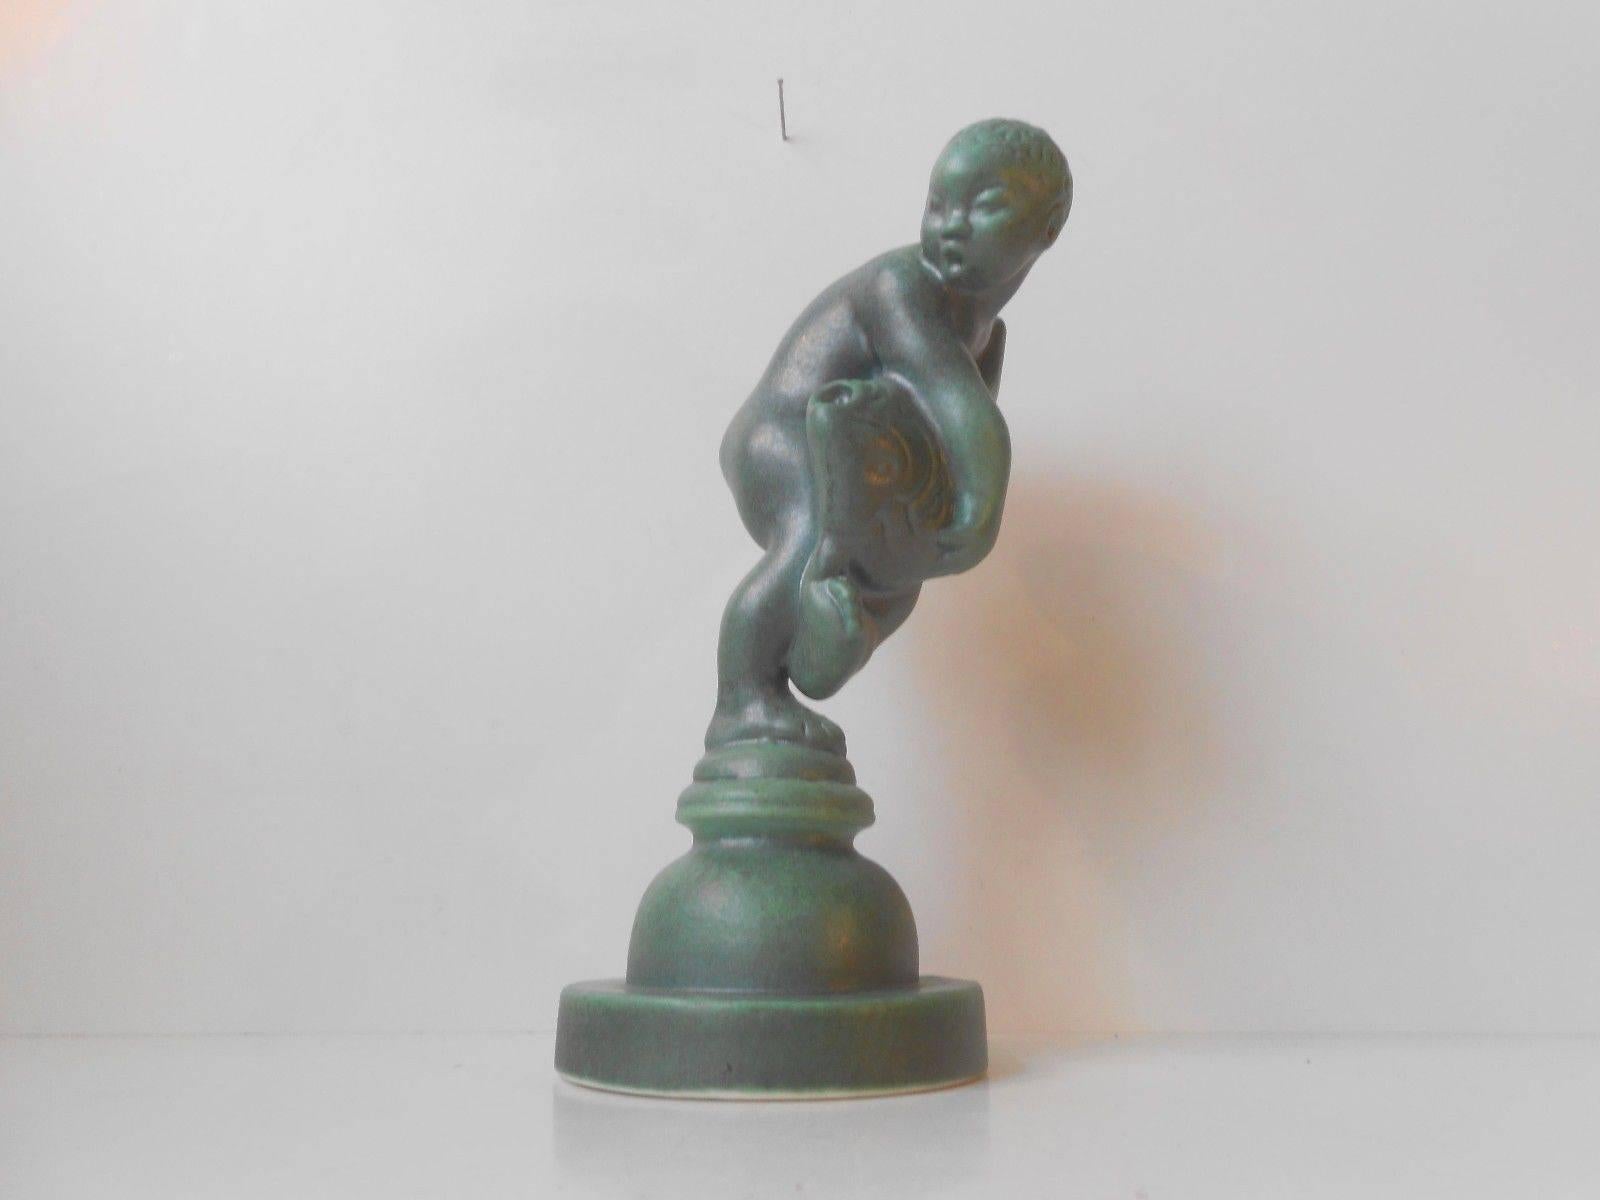 Measurements and infos:

Type: figure of boy and fish. 

Height: Approximately 21 cm (8.5 inches).

Base diameter: Approximately 9 cm (3.75 inches).

Material: terracotta with 